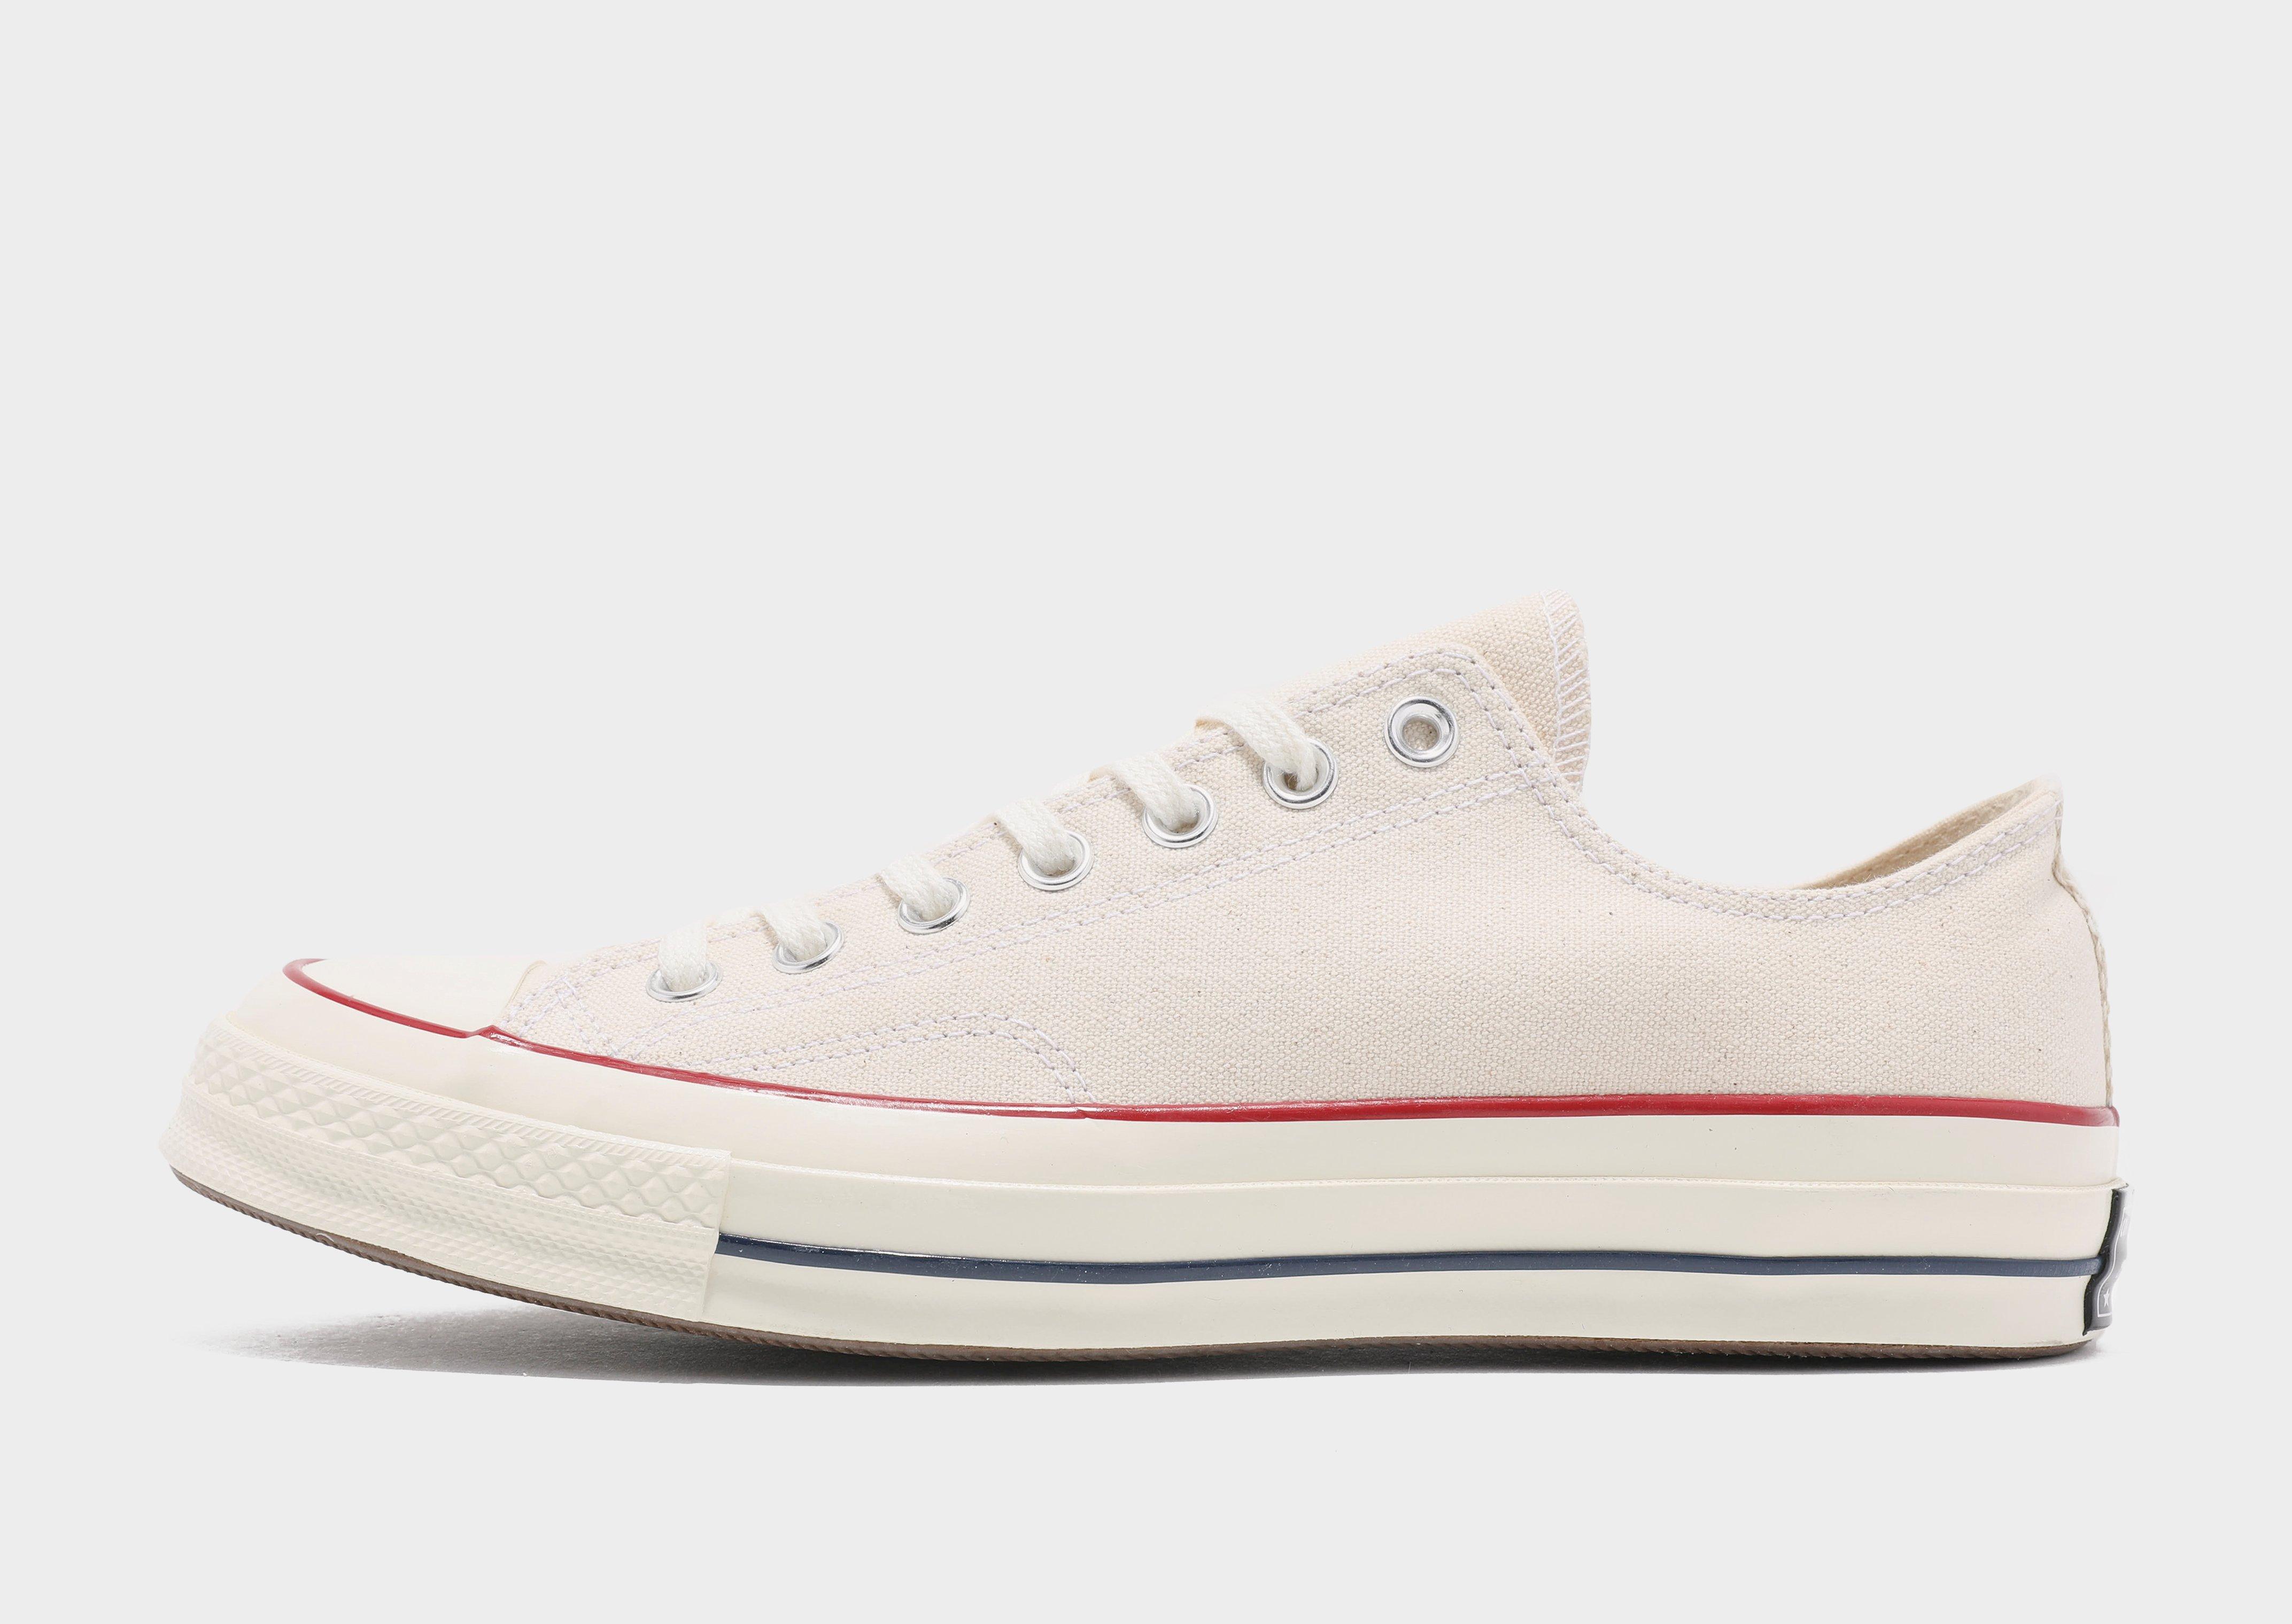 converse chuck taylor all star 70's low women's